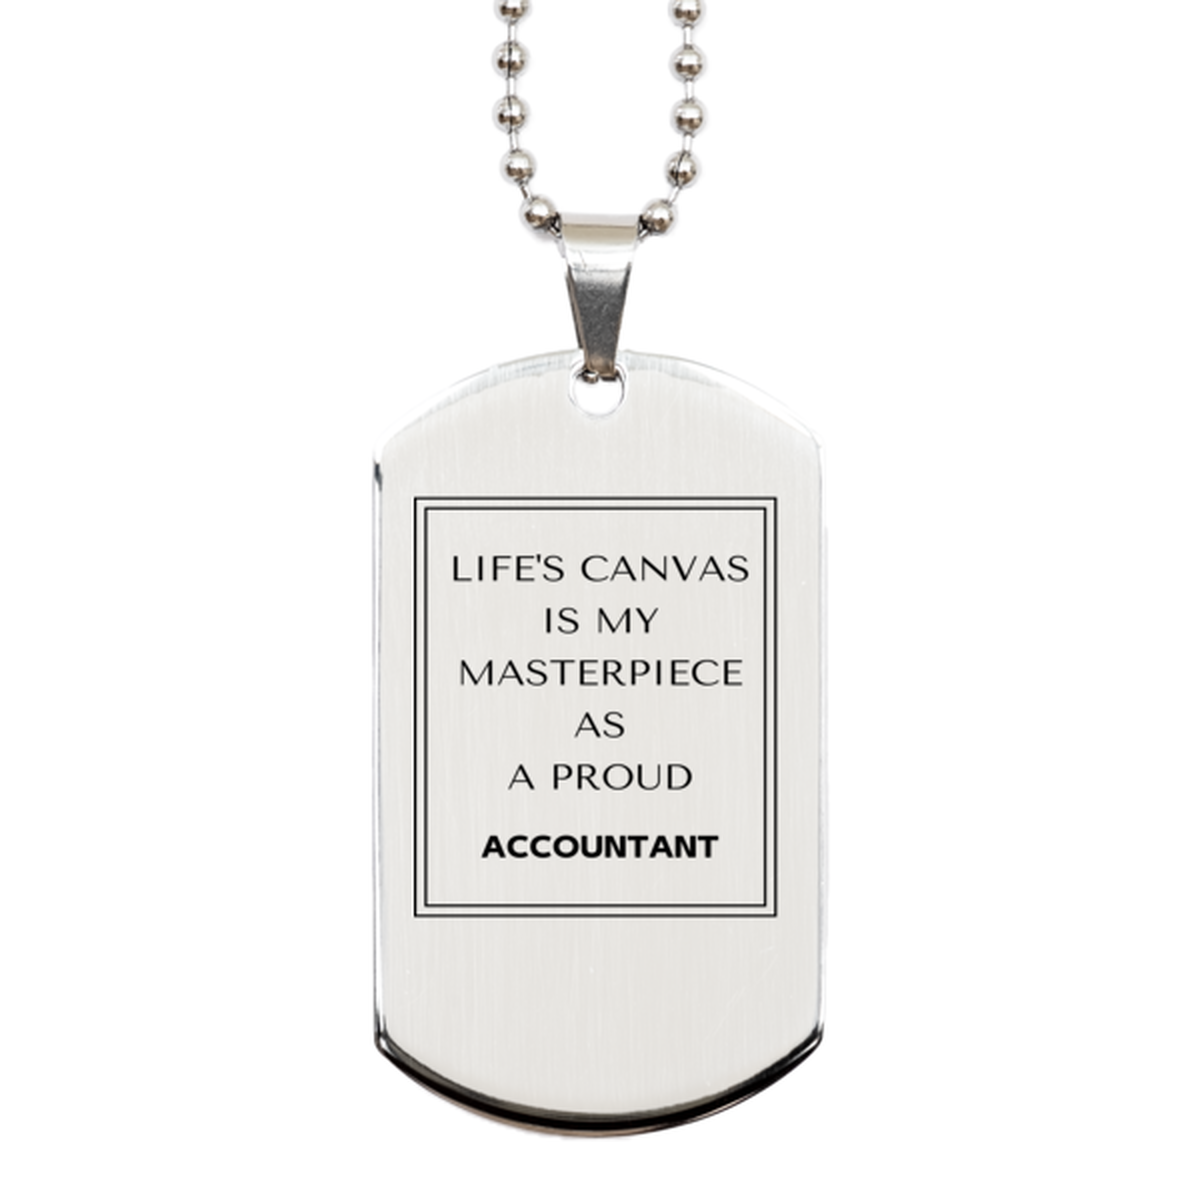 Proud Accountant Gifts, Life's canvas is my masterpiece, Epic Birthday Christmas Unique Silver Dog Tag For Accountant, Coworkers, Men, Women, Friends